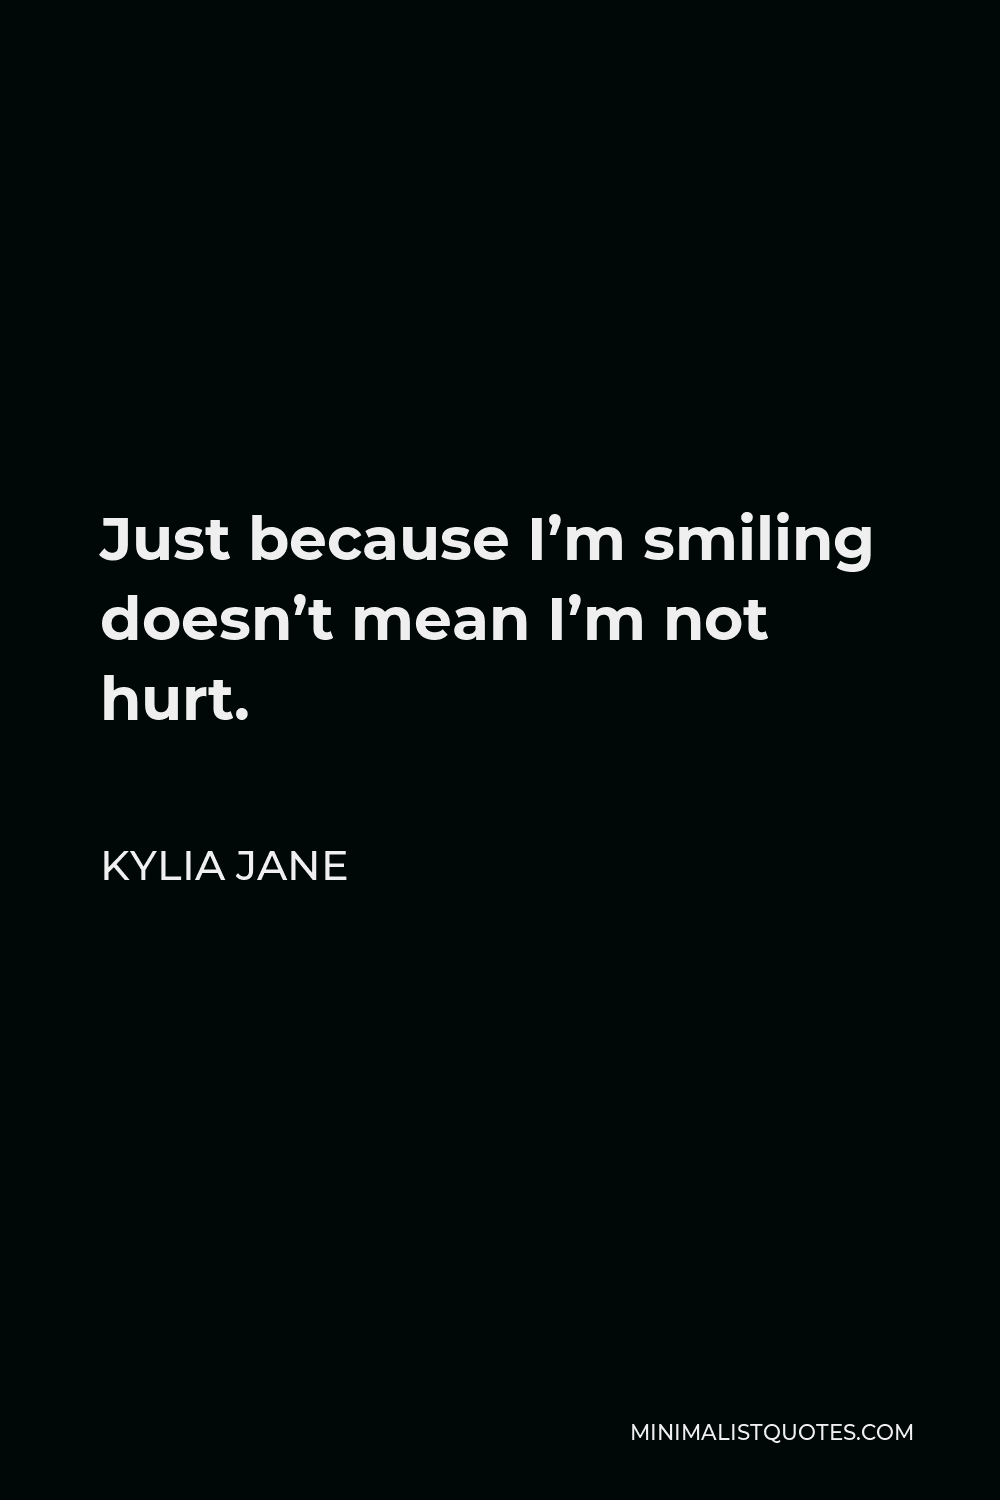 Kylia Jane Quote - Just because I’m smiling doesn’t mean I’m not hurt.